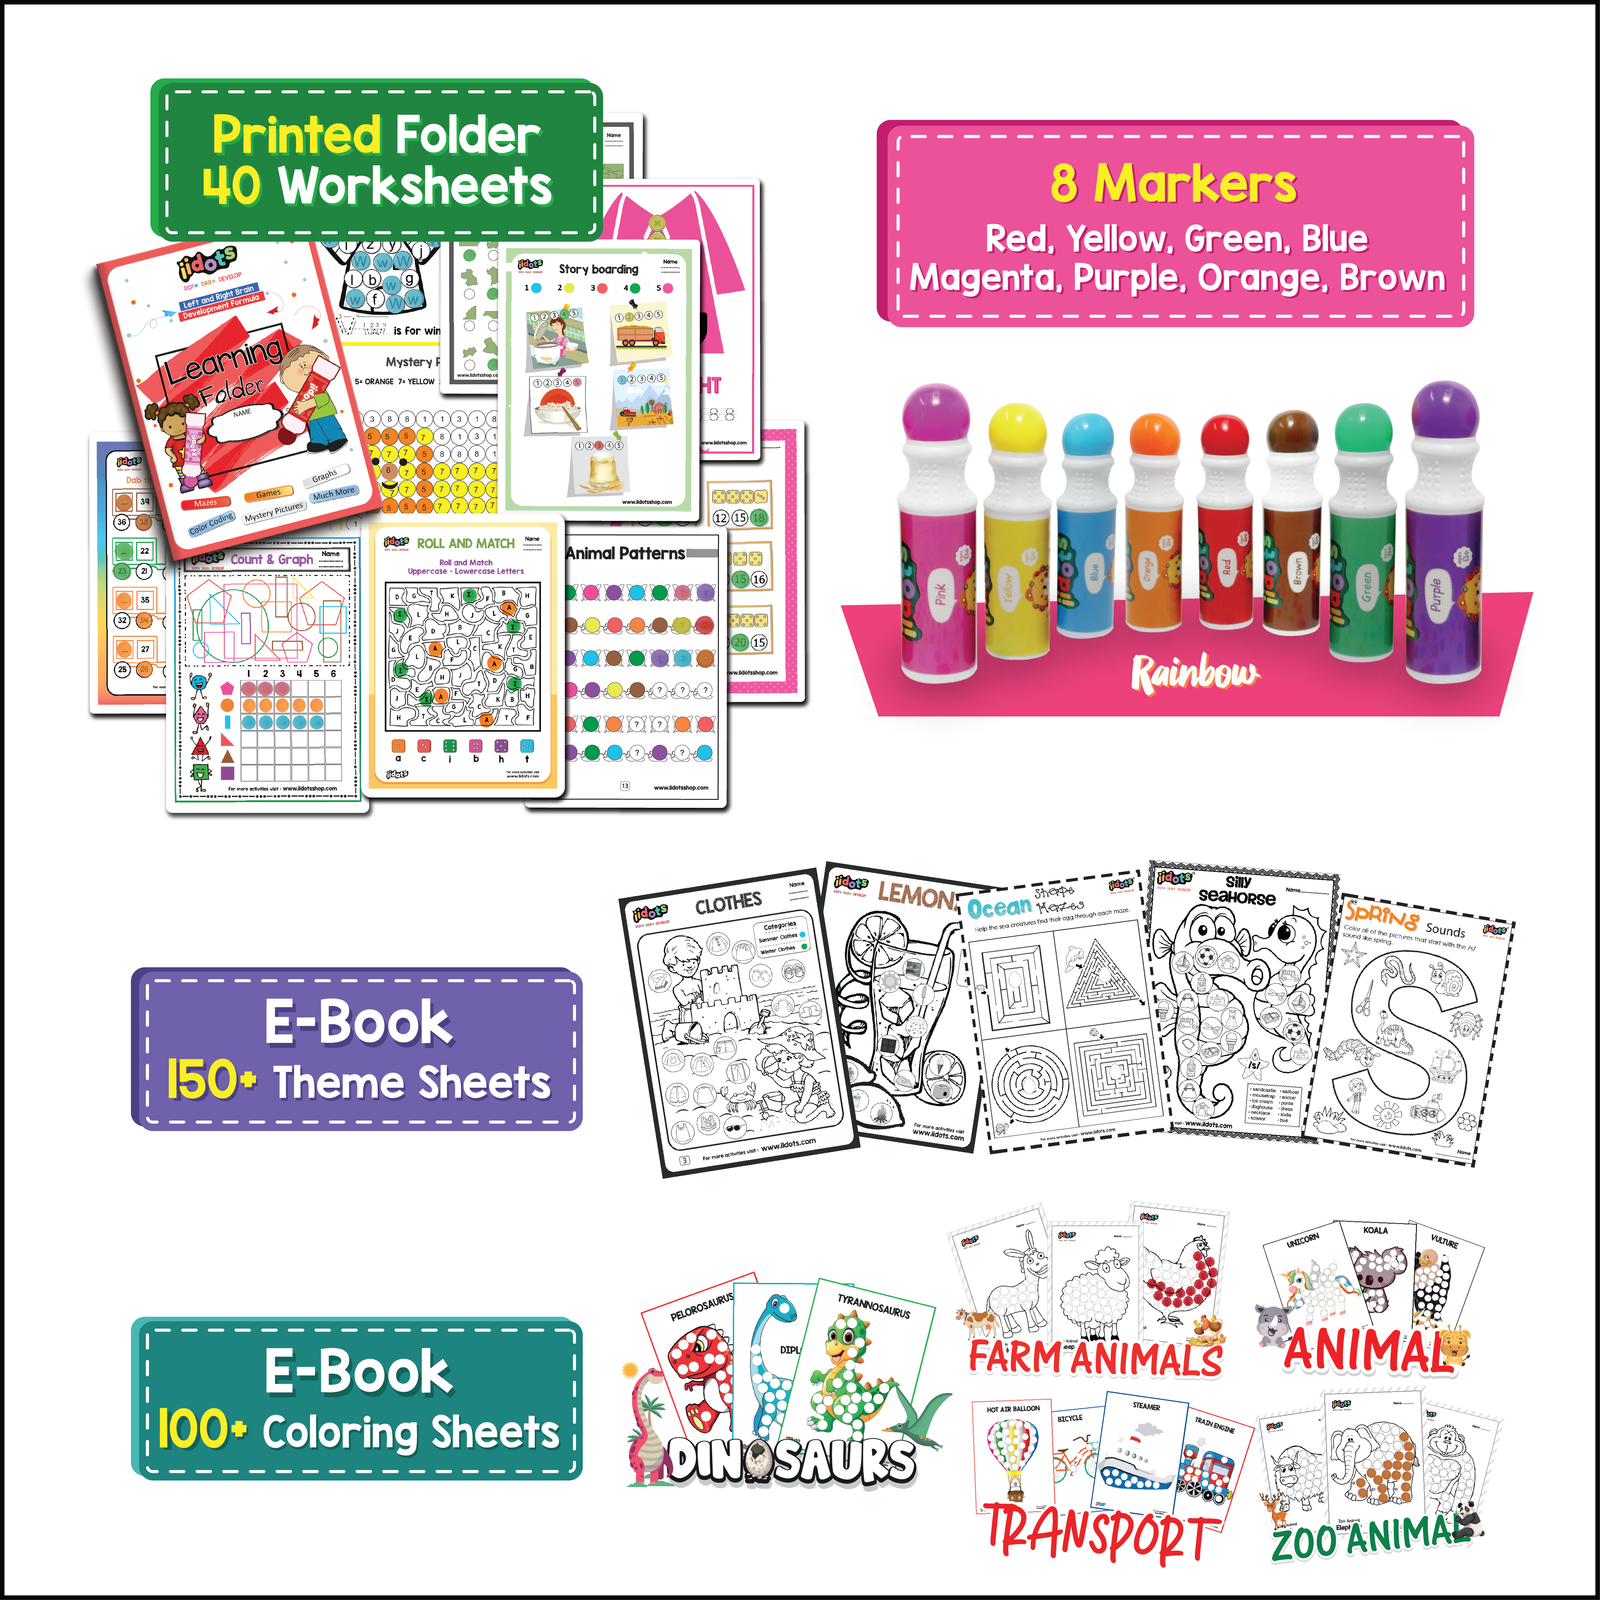 40 iidots worksheets based on different themes like animals, letters, games, and transport for brain development. The set of 8 different colour markers provides a playful learning experience. 150+ E-book theme sheets and 100+ Coloring sheets ensure mastery of hand dexterity and nurturing the development of fine motor skills.